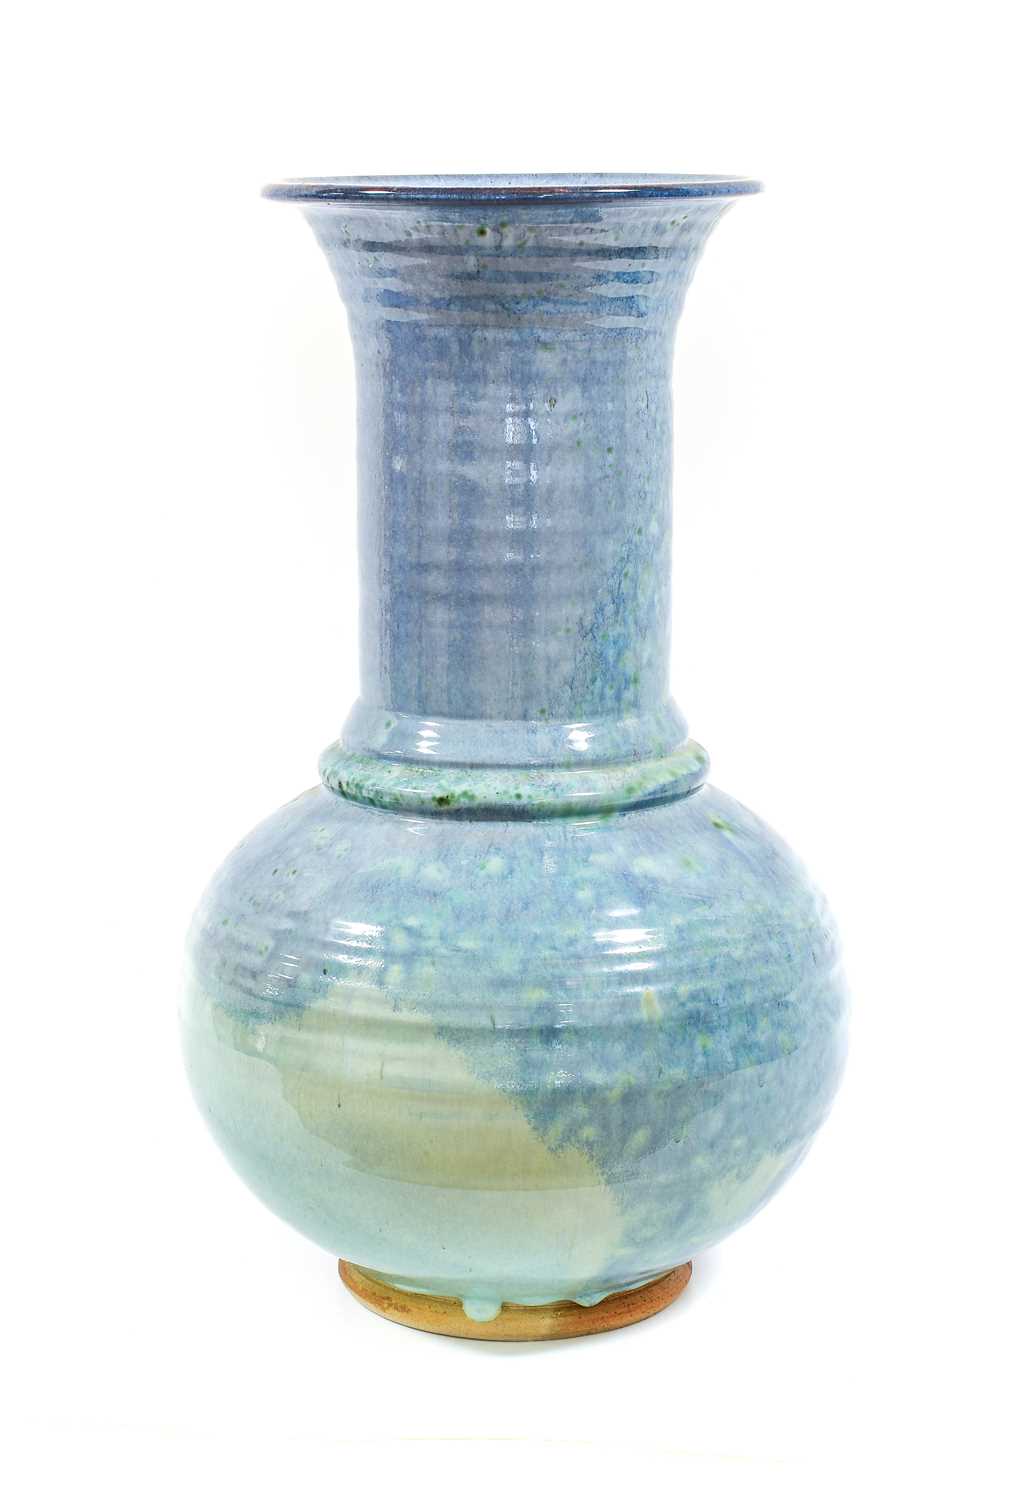 David Fry (b.1948): A Stoneware Vase, blue and green high fired glaze, impressed D:FRY potter's mark